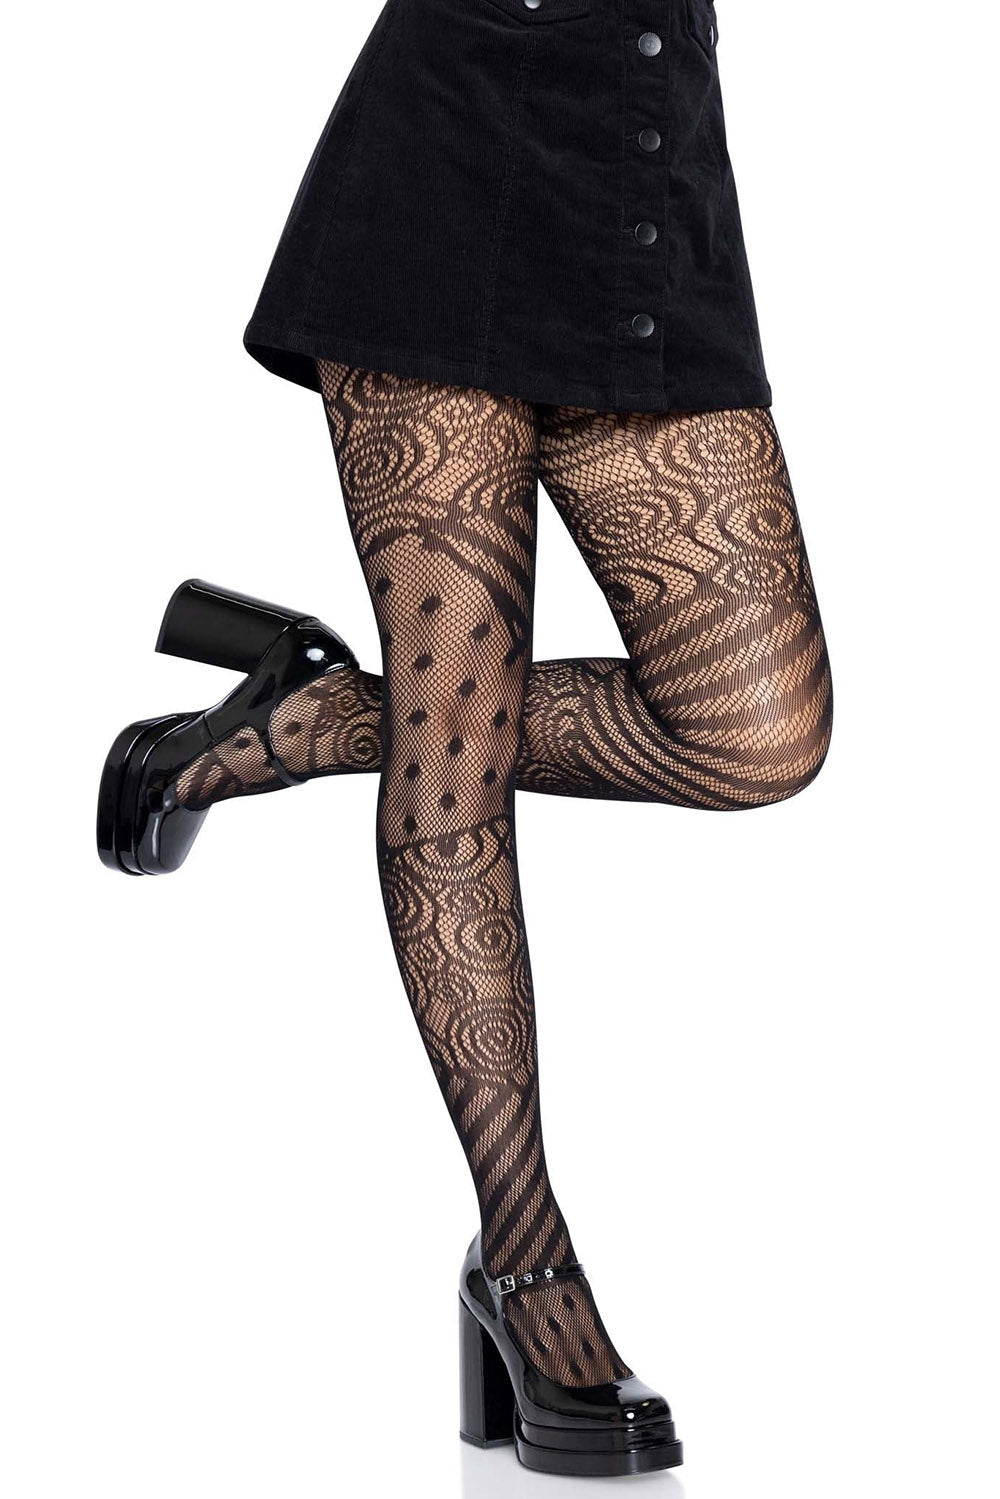 Sally's Song Patchwork Tights